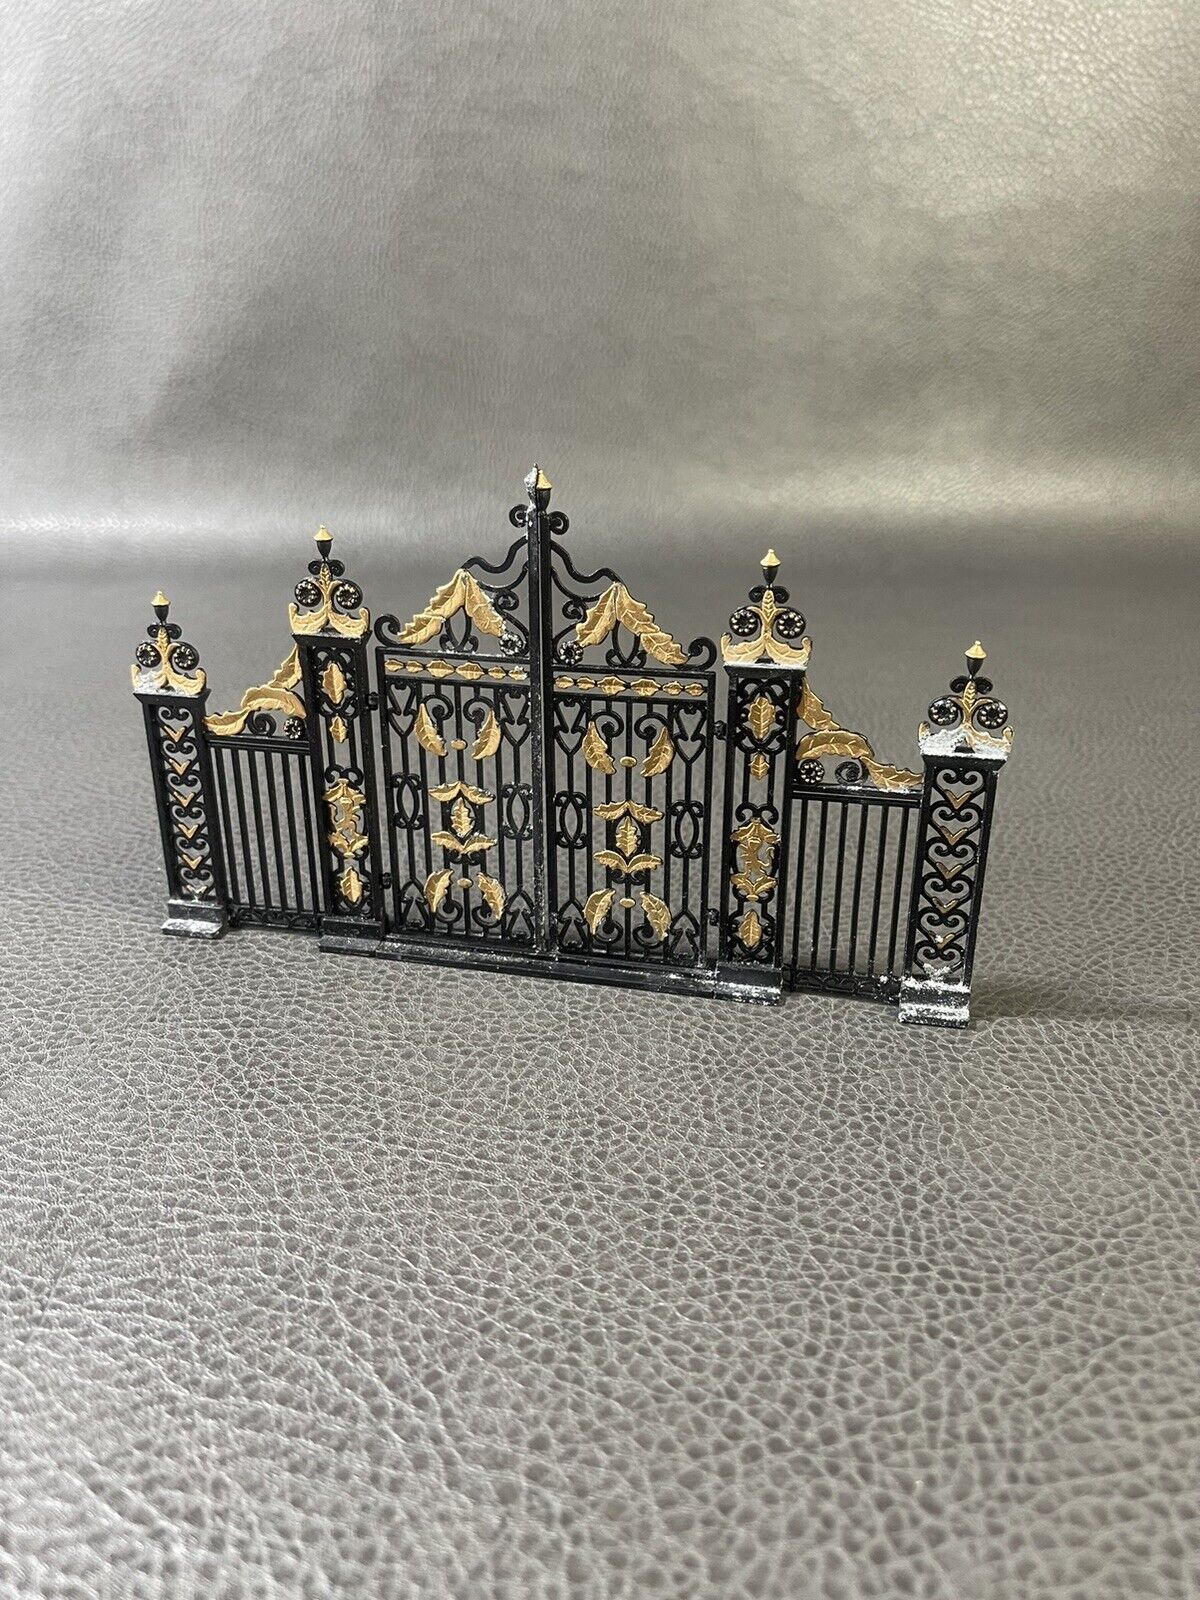 Dept 56 Dickens Village Kensington Palace Metal Gate Replacement Oxidation Issue